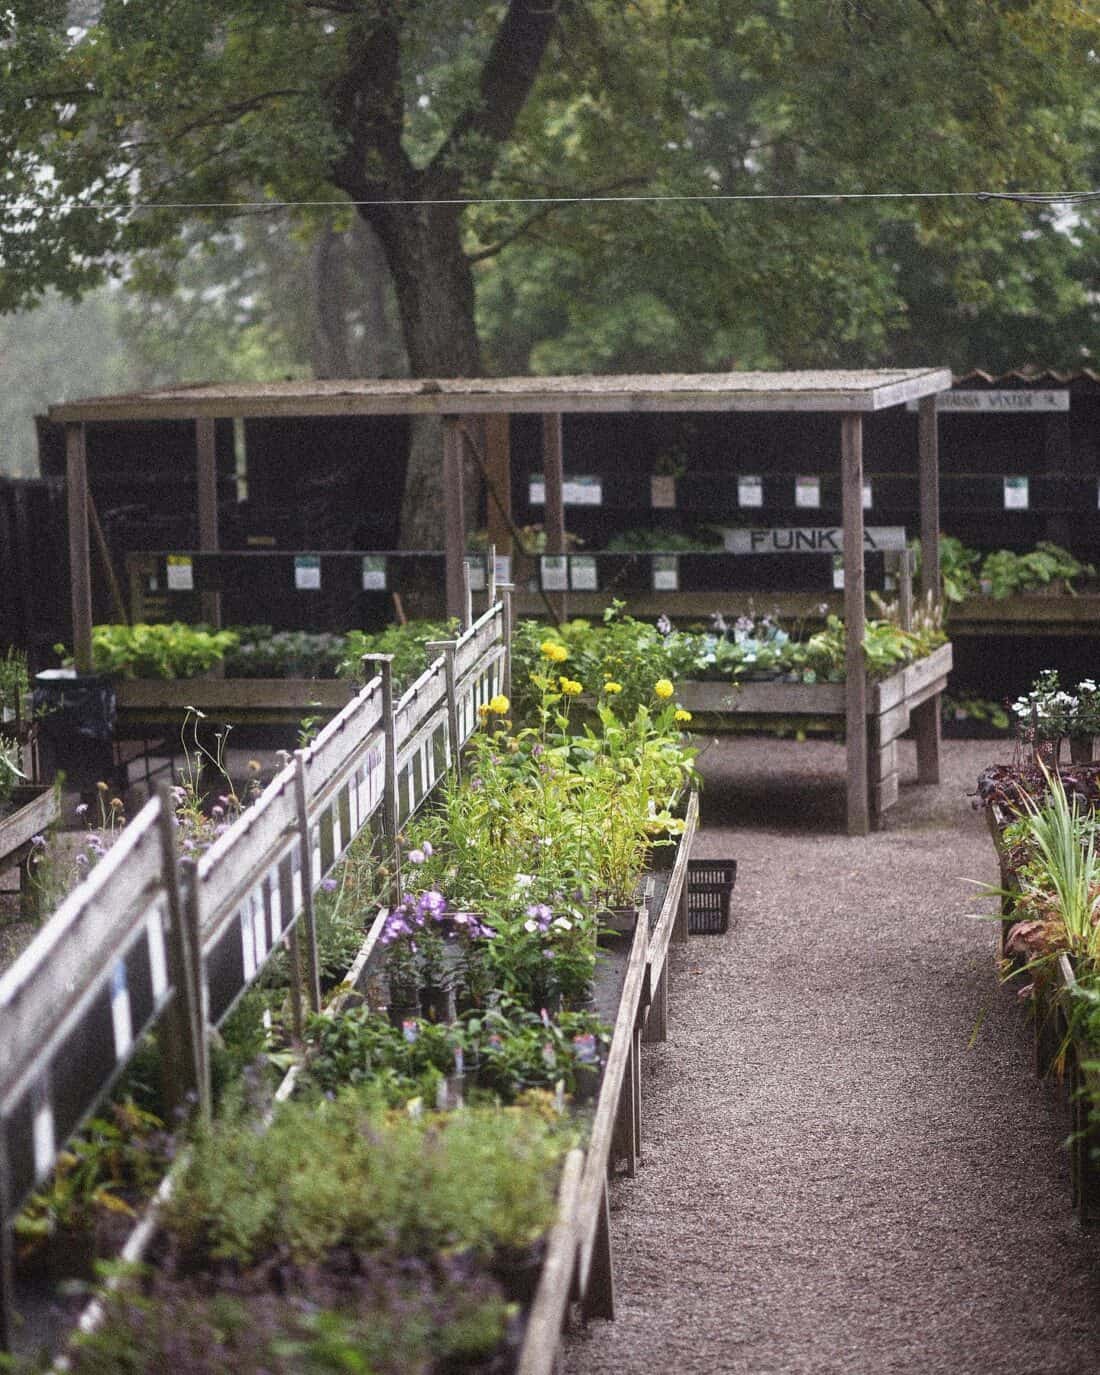 Rows of potted plants and flowers for sale at a misty outdoor garden center.